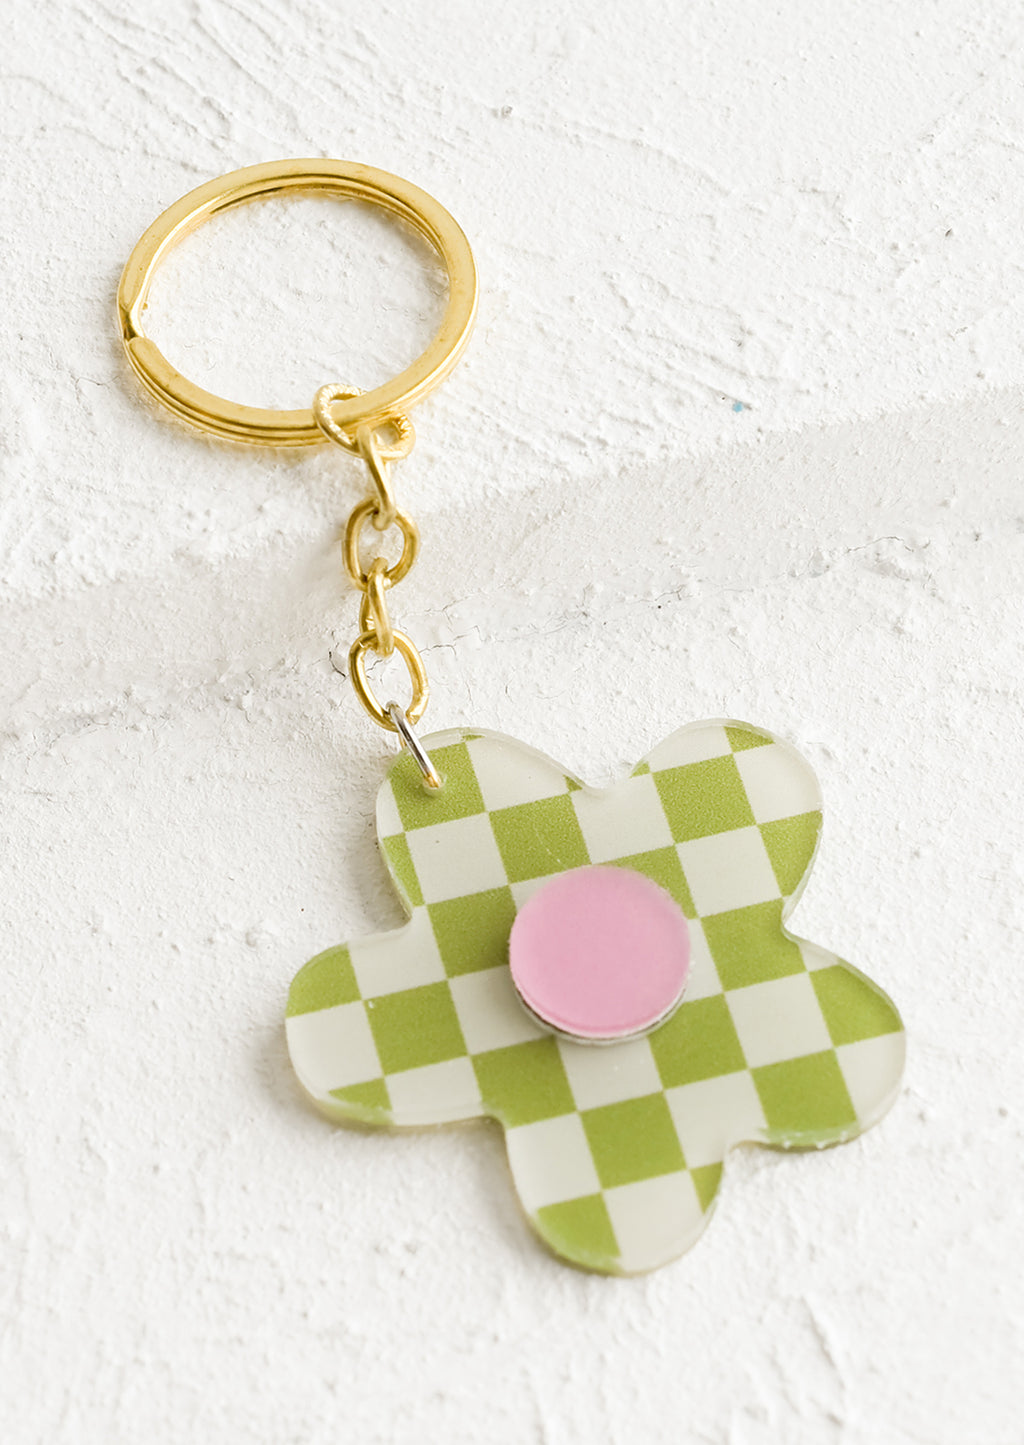 Lime Multi: A flower shaped keychain in green checker print with pink center.